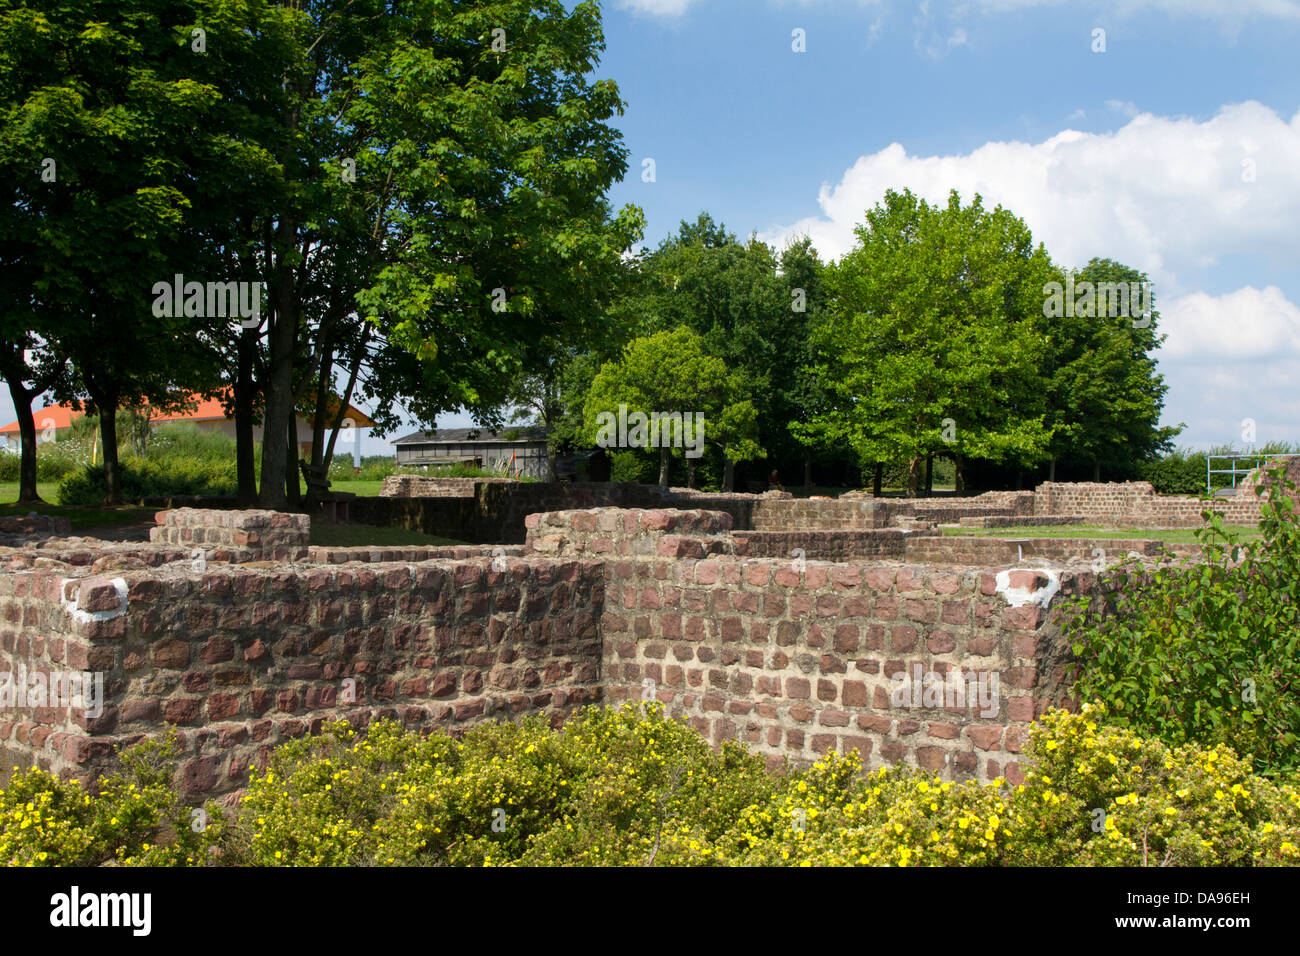 Germany, Hessen, Roman, villa Haselburg, Höchst, Hummetroth, Forest of Odes, excavation, excavations, ruins, leftovers, archeolo Stock Photo